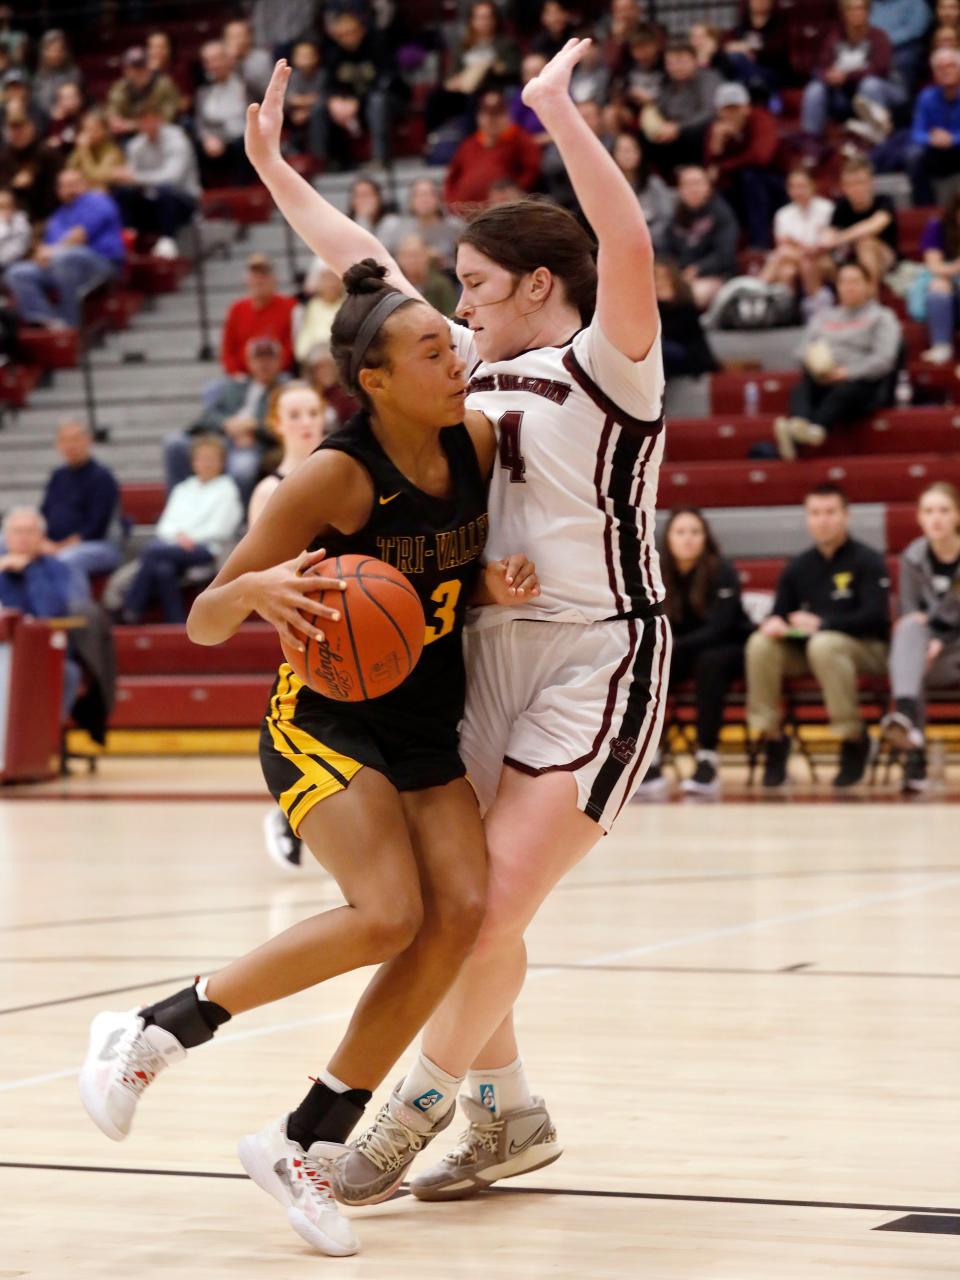 Tri-Valley's Lexi Howe drives into John Glenn's Maddie Winland on Wednesday night in New Concord.